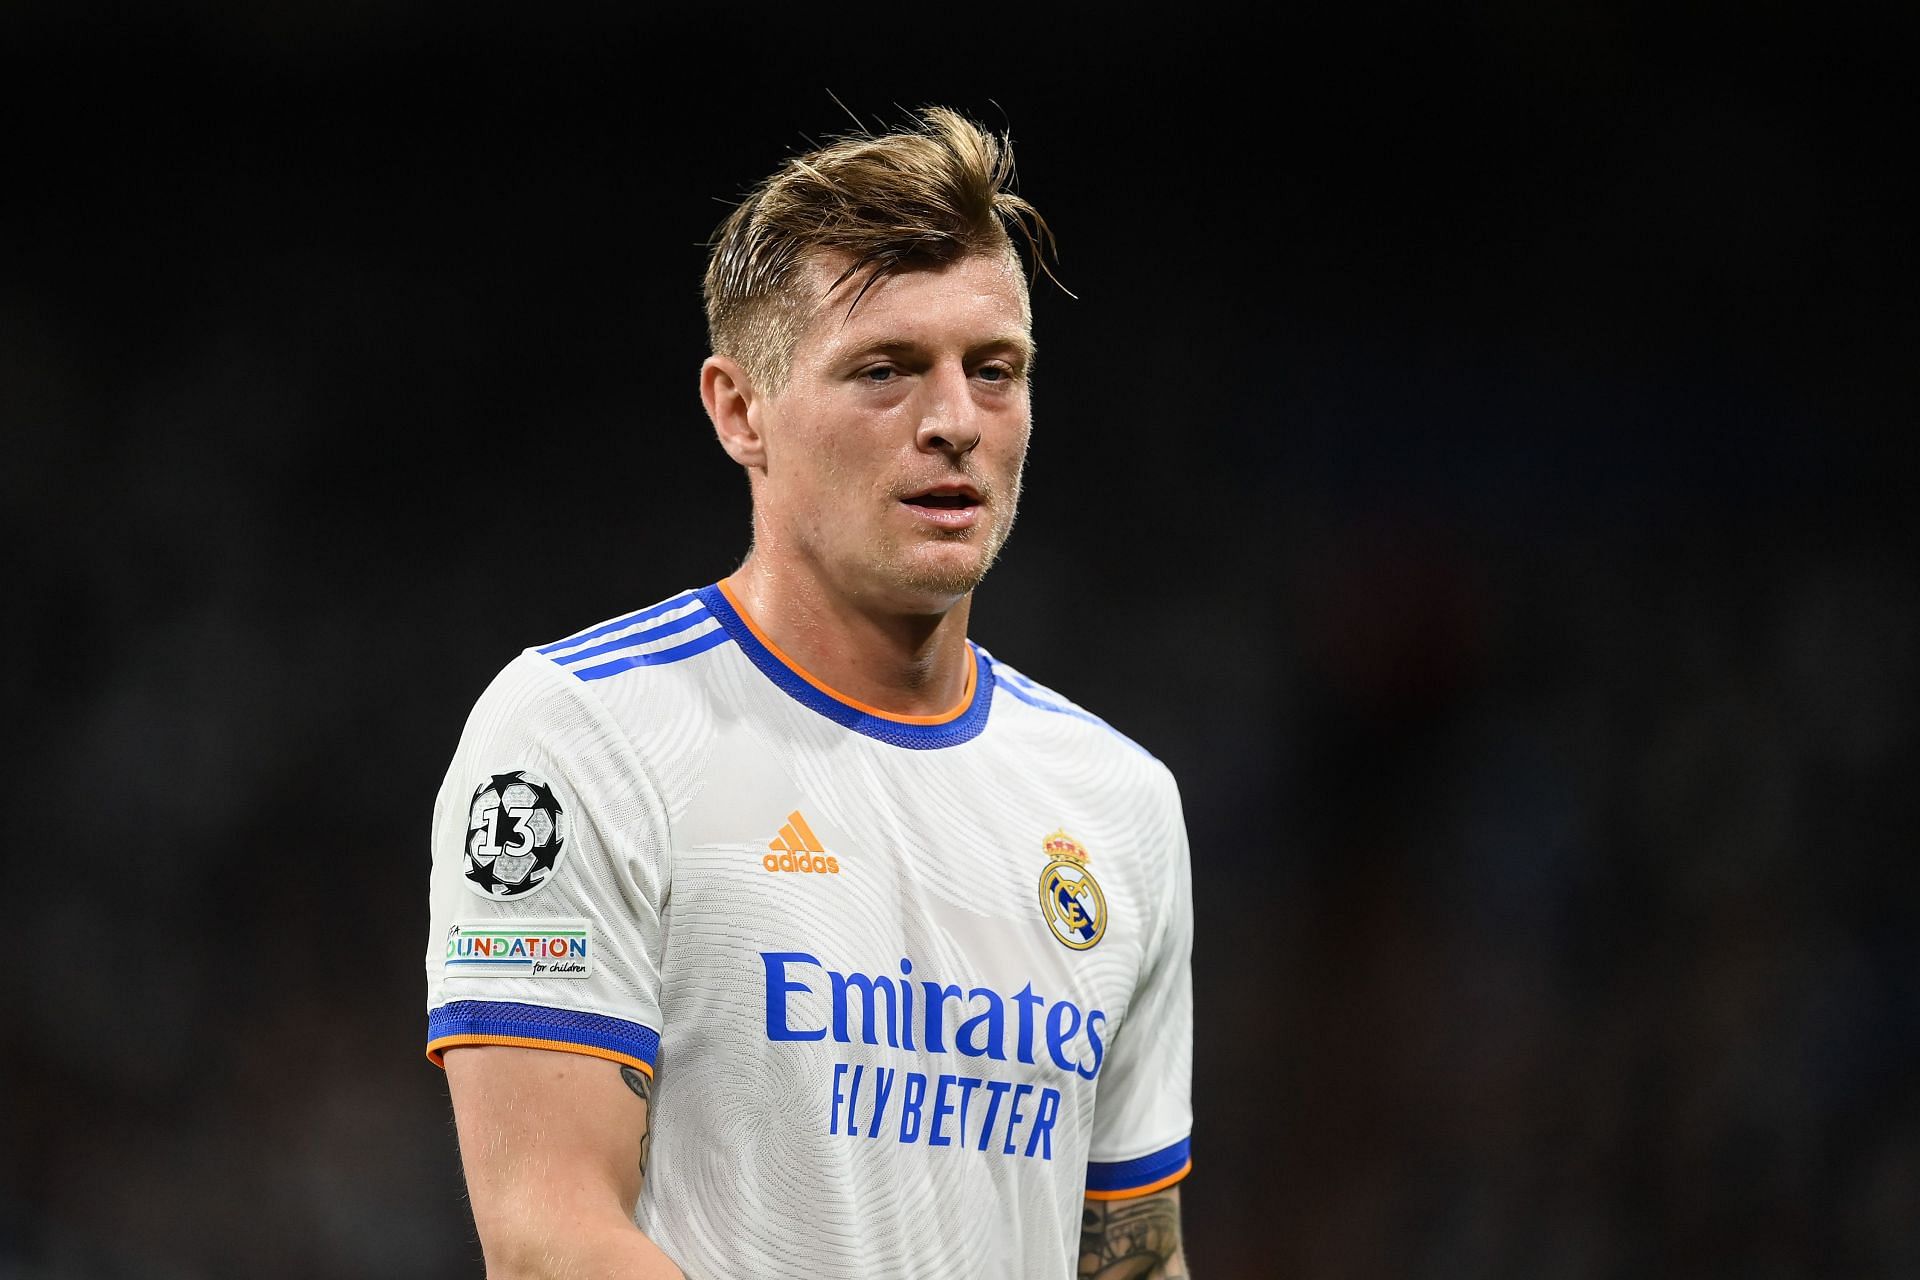 Toni Kroos was wanted at Manchester United years ago.